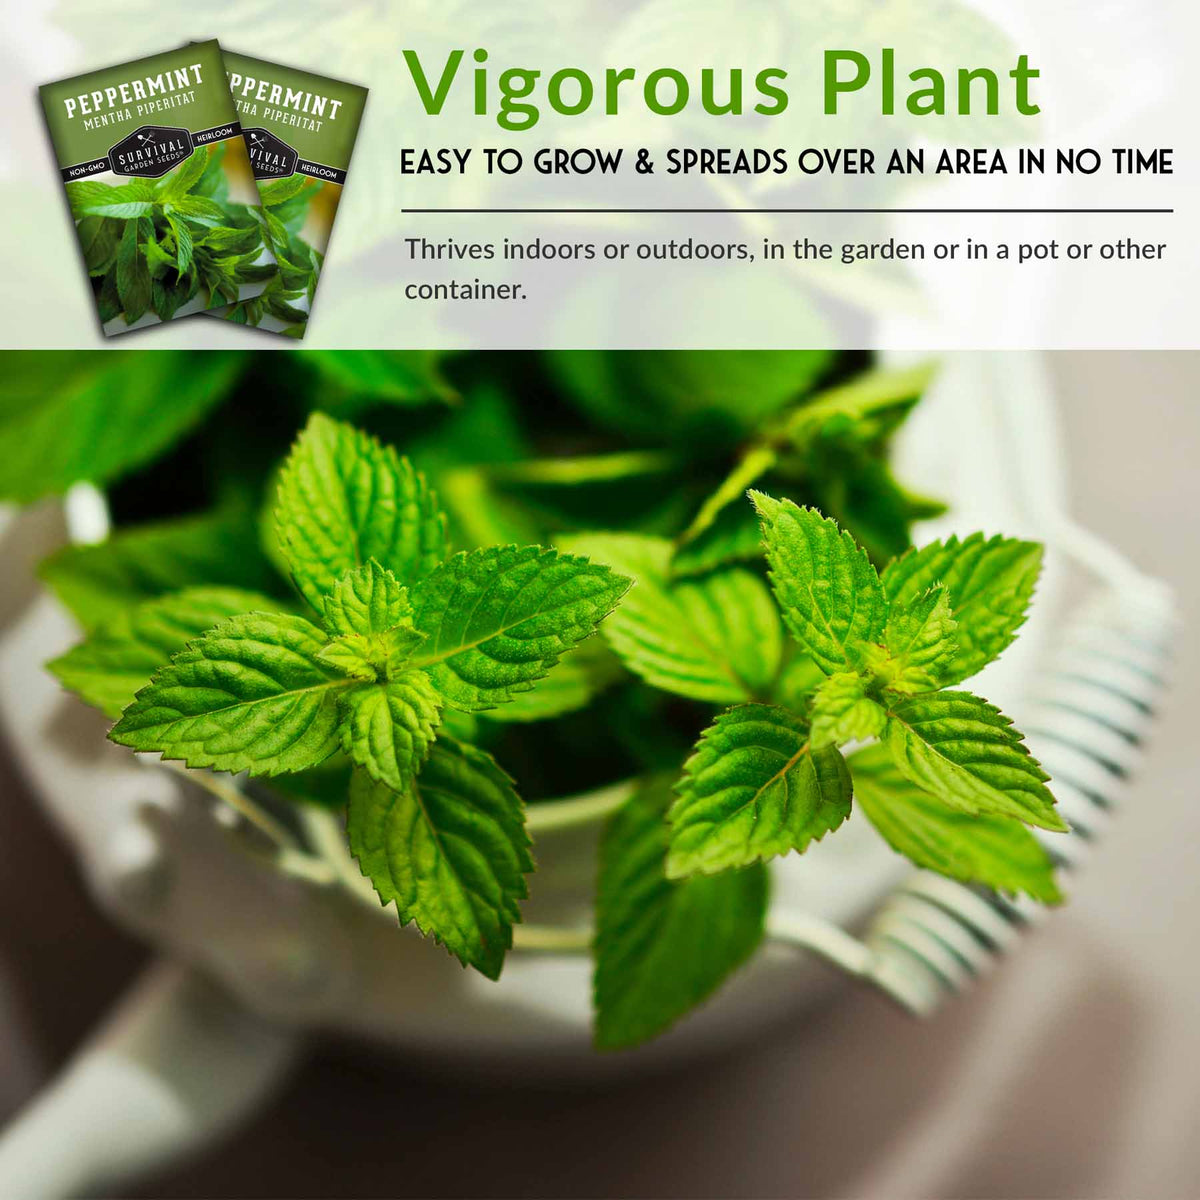 Peppermint is easy to grow and vigorous